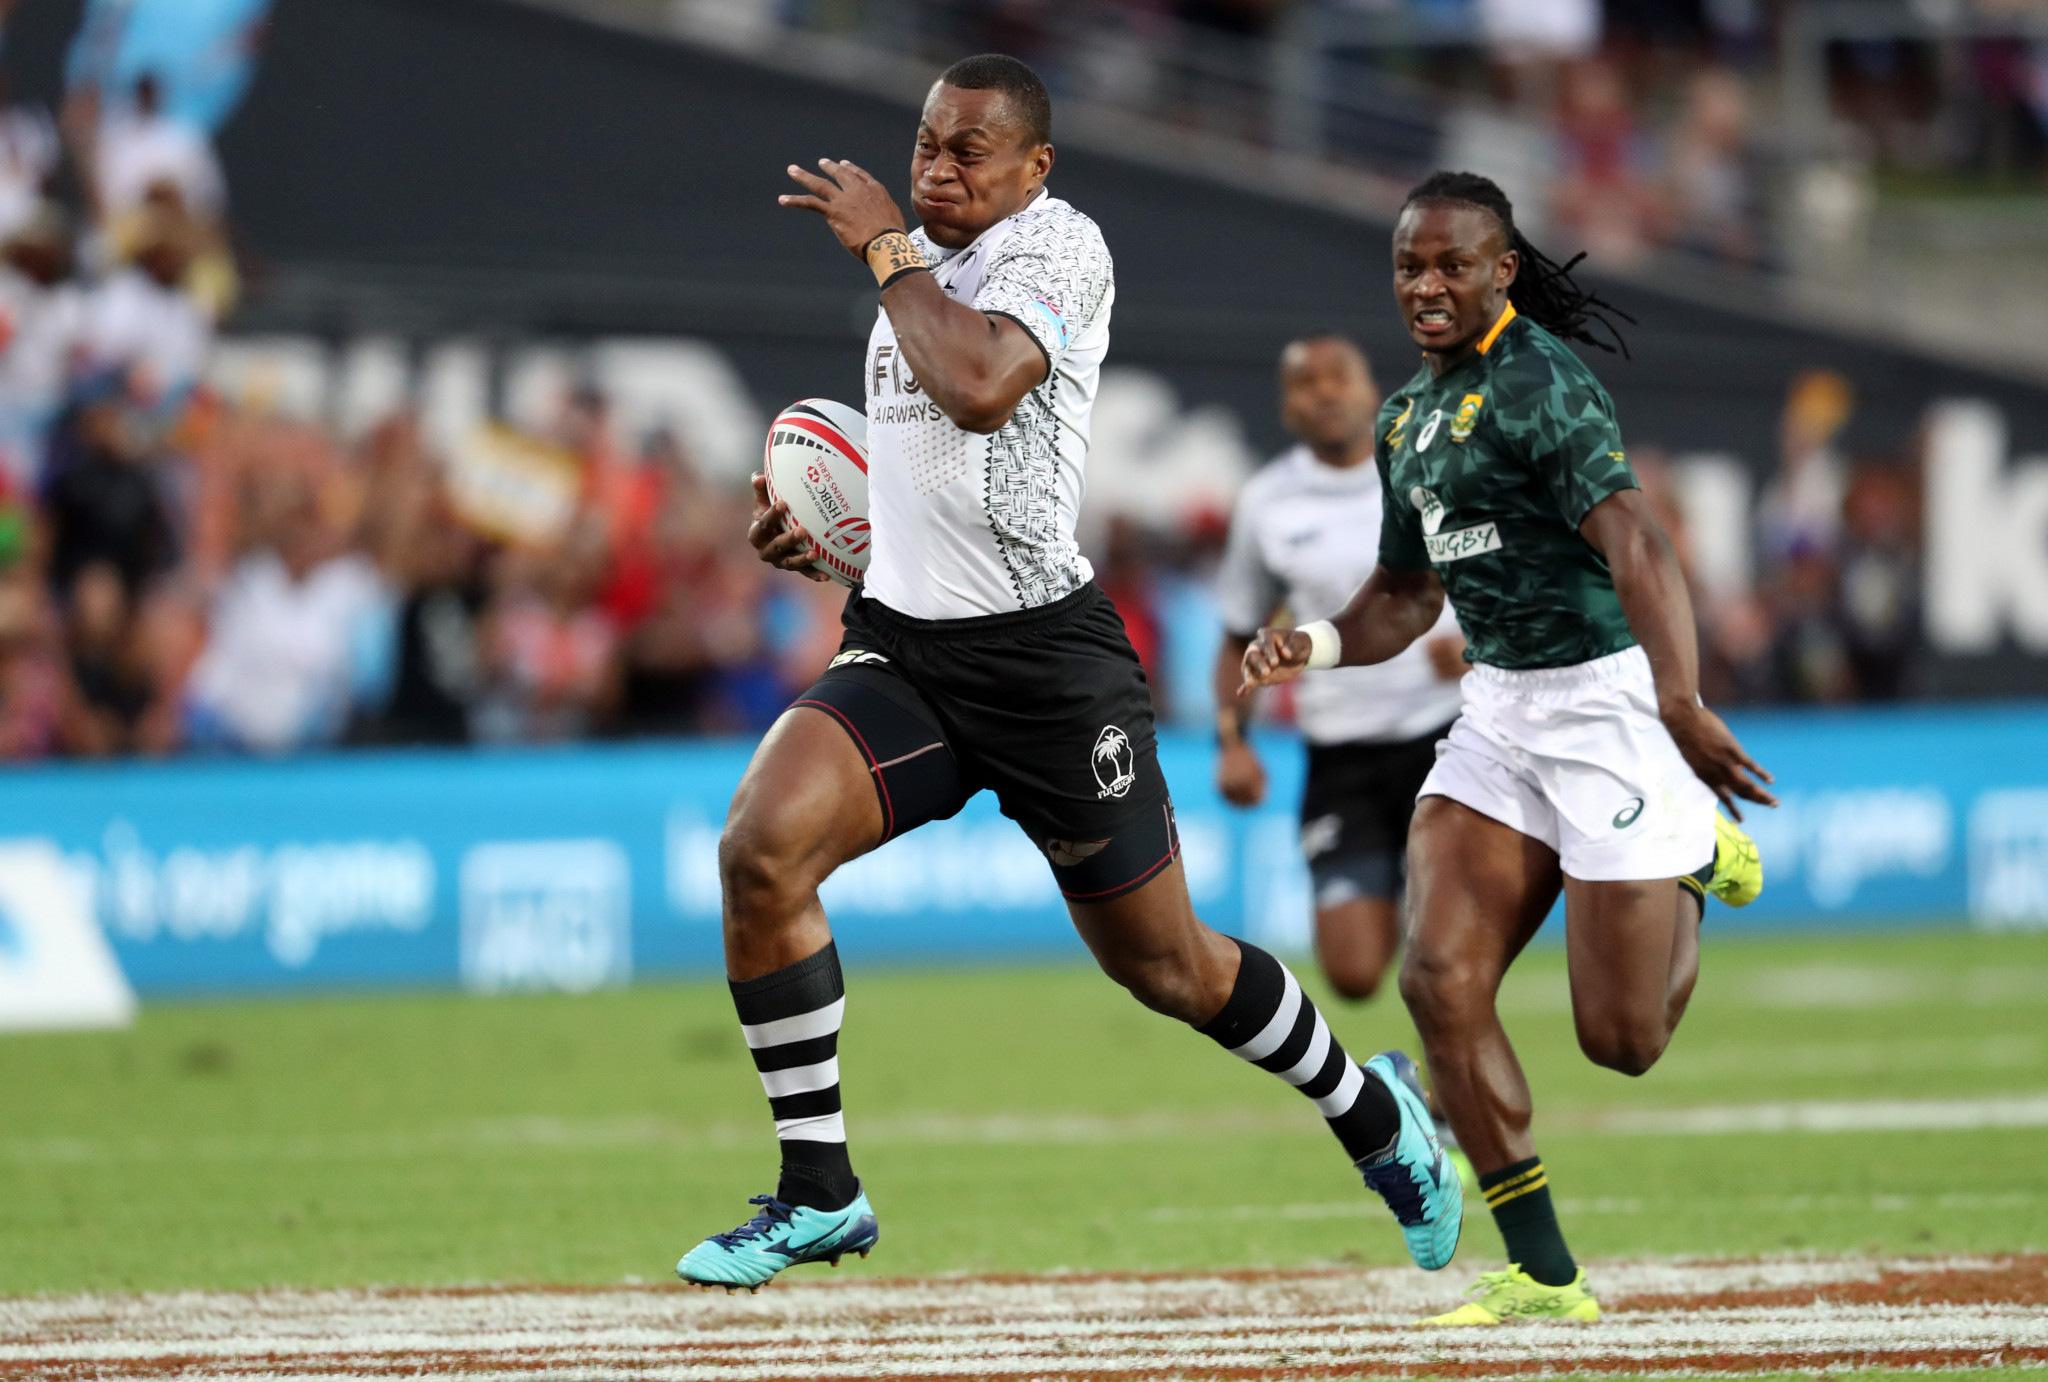 Fiji overturned a half-time deficit to beat South Africa in the final ©Getty Images